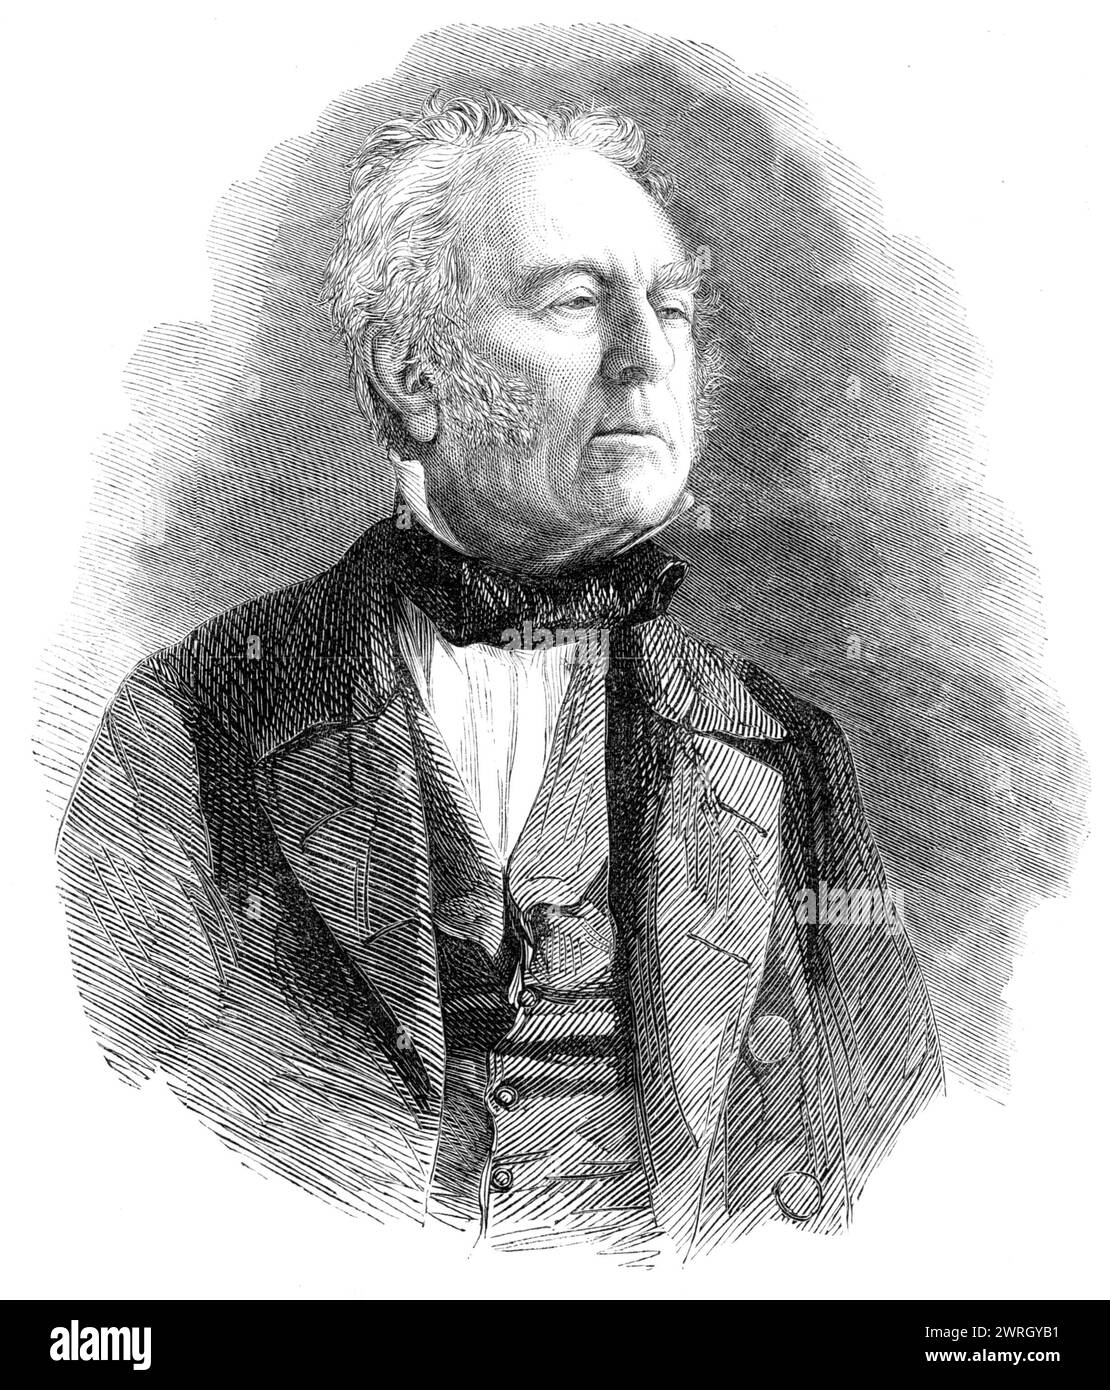 The late Walter Savage Landor, 1864. Engraving from a photograph by Mr. Herbert Watkins. 'Our readers may...look with some interest upon the portrait of a man of great originality and force of mind, who, having won a high rank in classical English literature, and taken his part in the battles of opinion for seventy years, died, the other day, at the great age of ninety, and left a name which will abide longer than those of some more facile and popular writers. He was born on the 30th of January, 1775, at Ipsley Court, Warwickshire; he died, on the 17th of September last, at Florence. Ten years Stock Photo